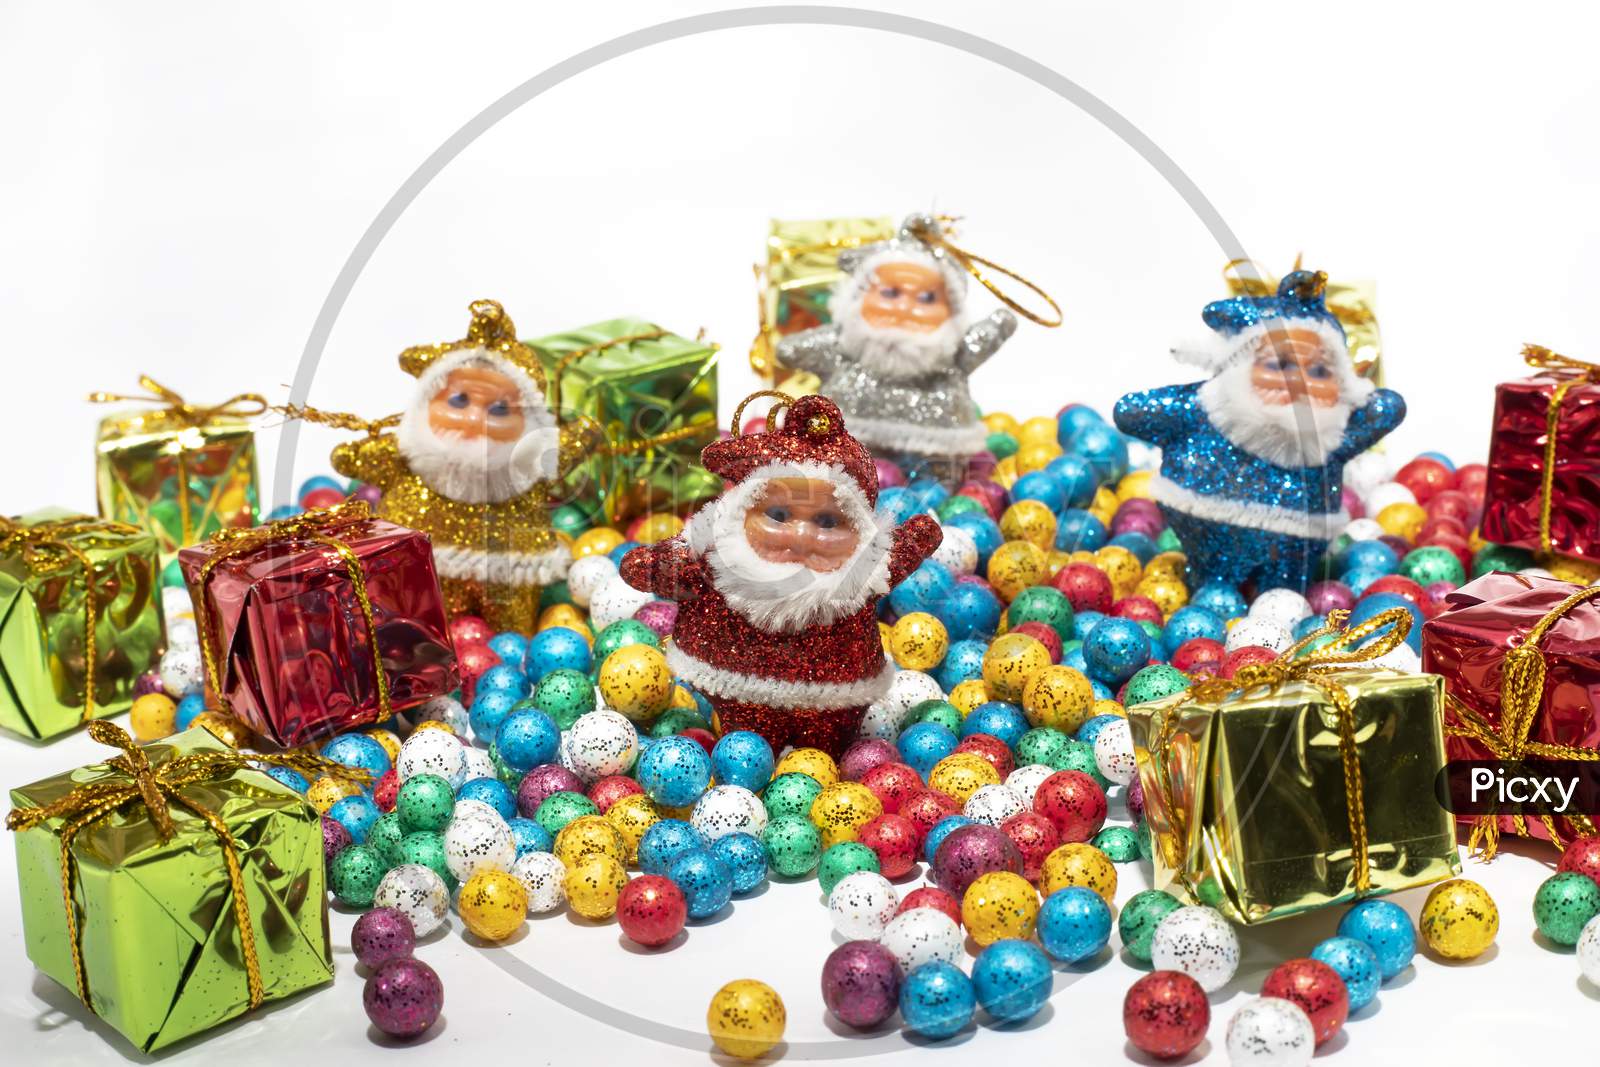 Santa Claus With Colorful Balls And Gift Boxes On White Background.